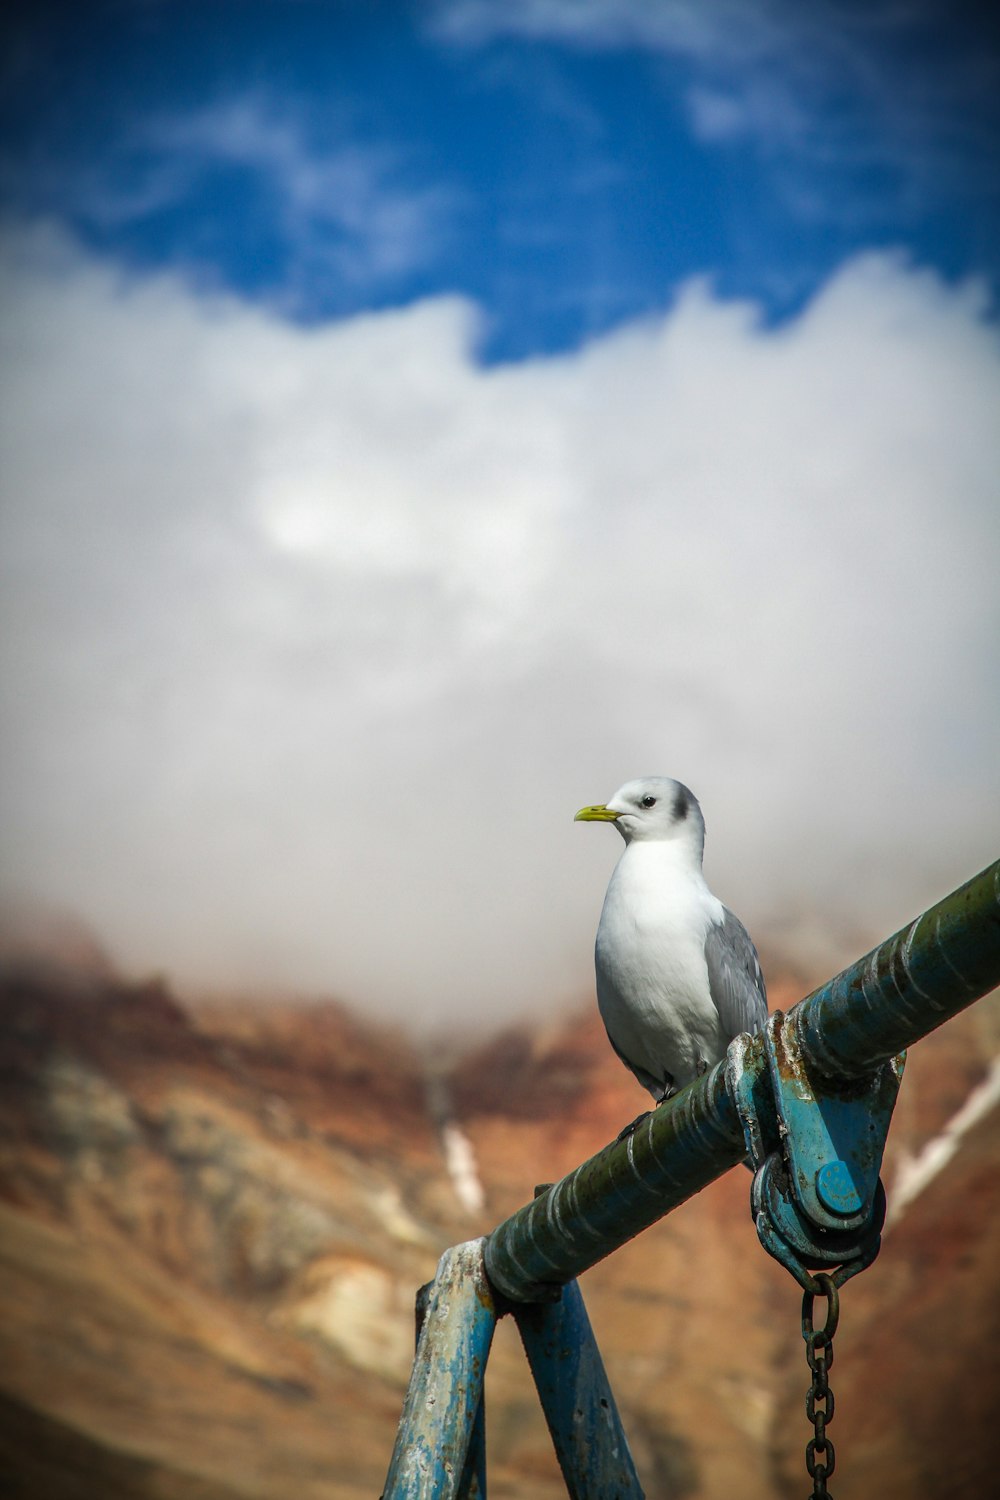 bird perched on metal pole